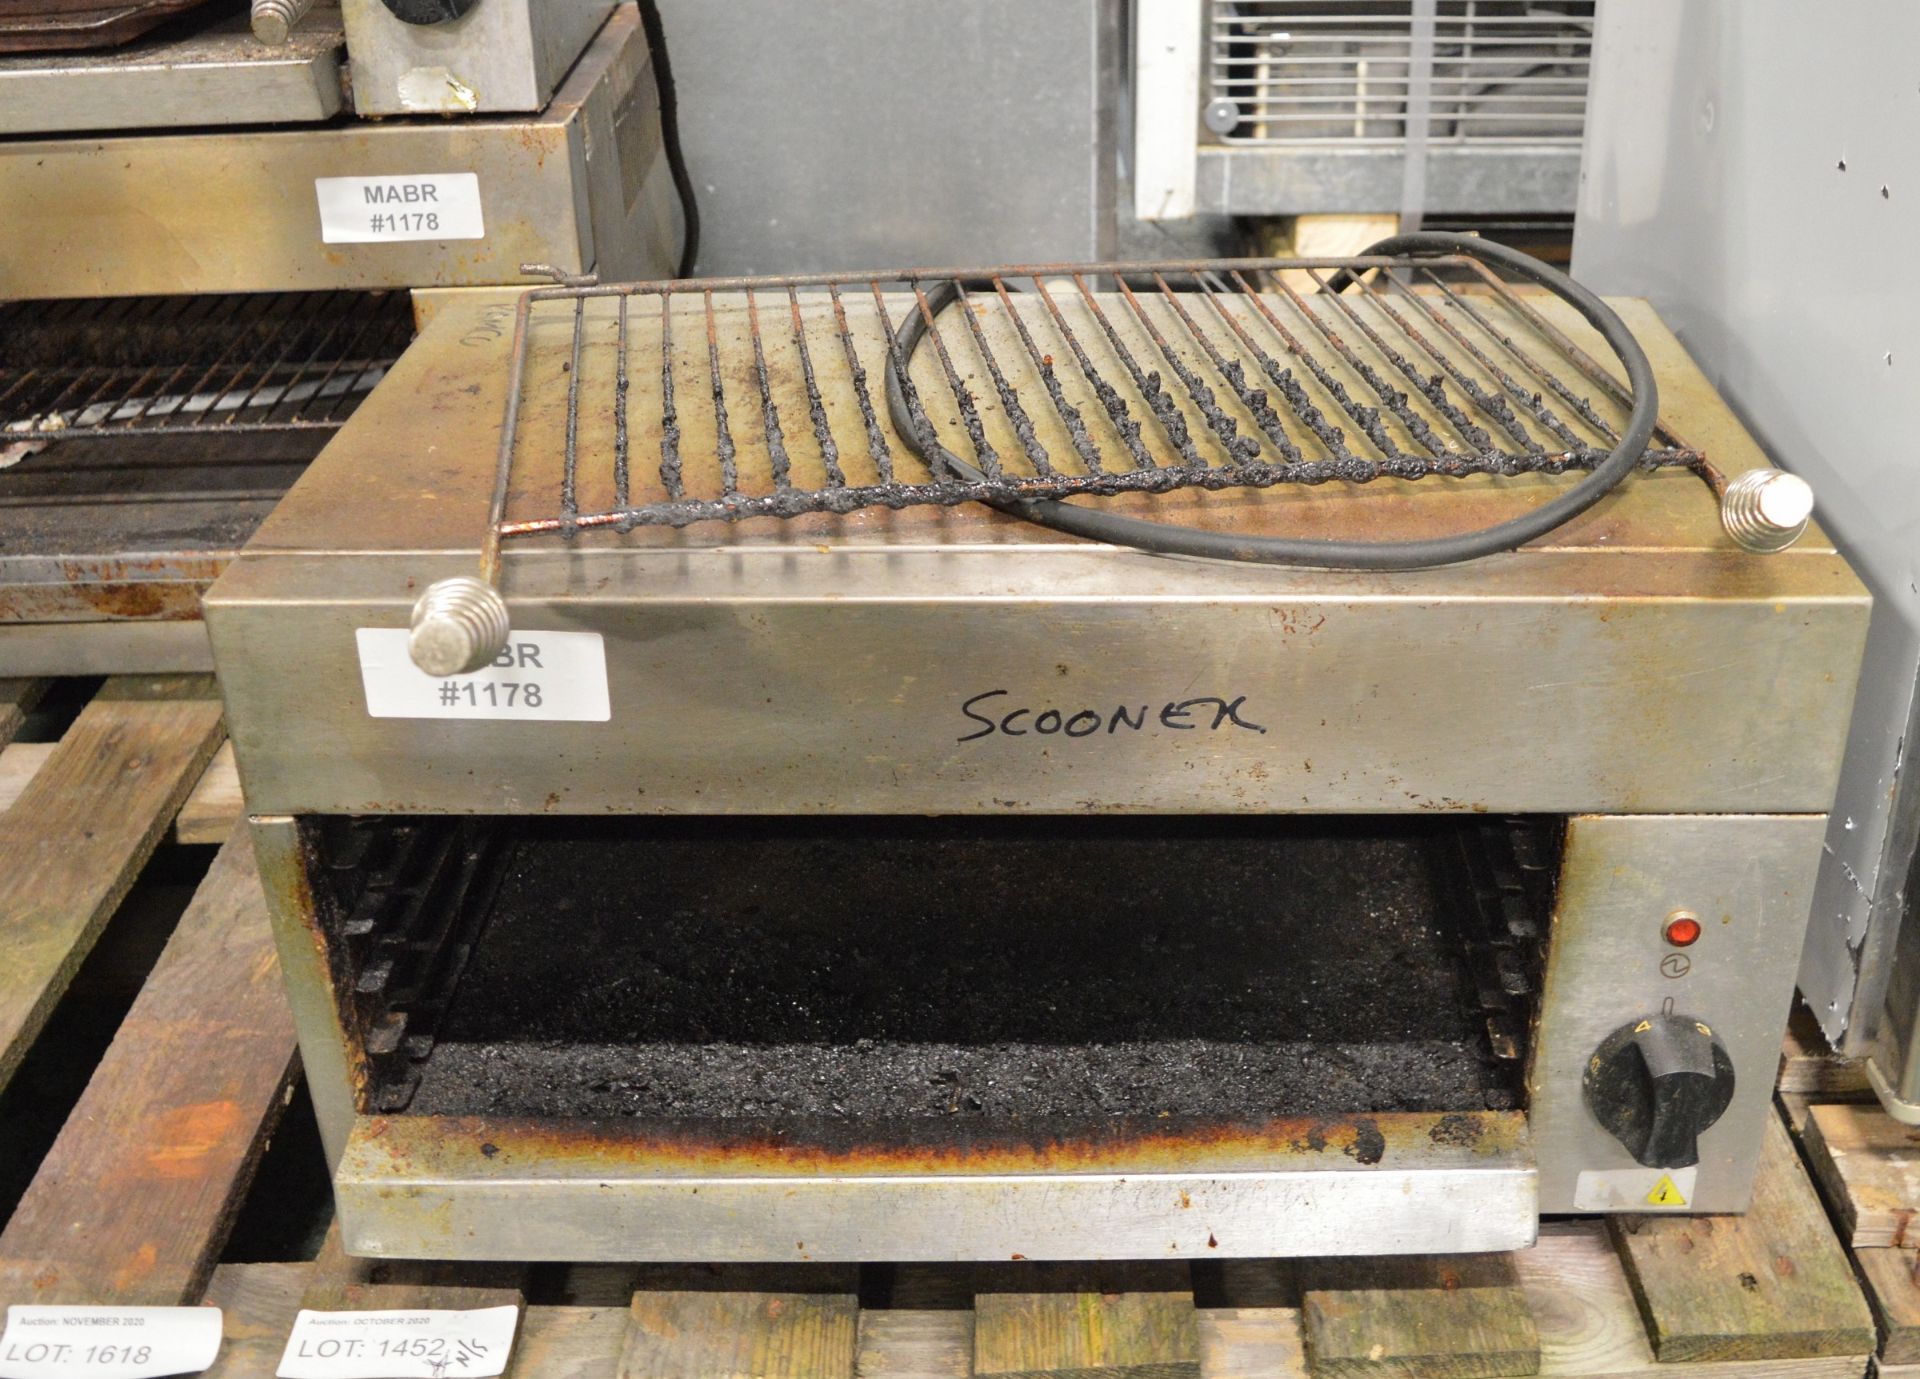 2x Falcon LD22 Electric Grill & Hobart SEL 2/0 Adjustable Electric Salamander Grill - Image 3 of 5